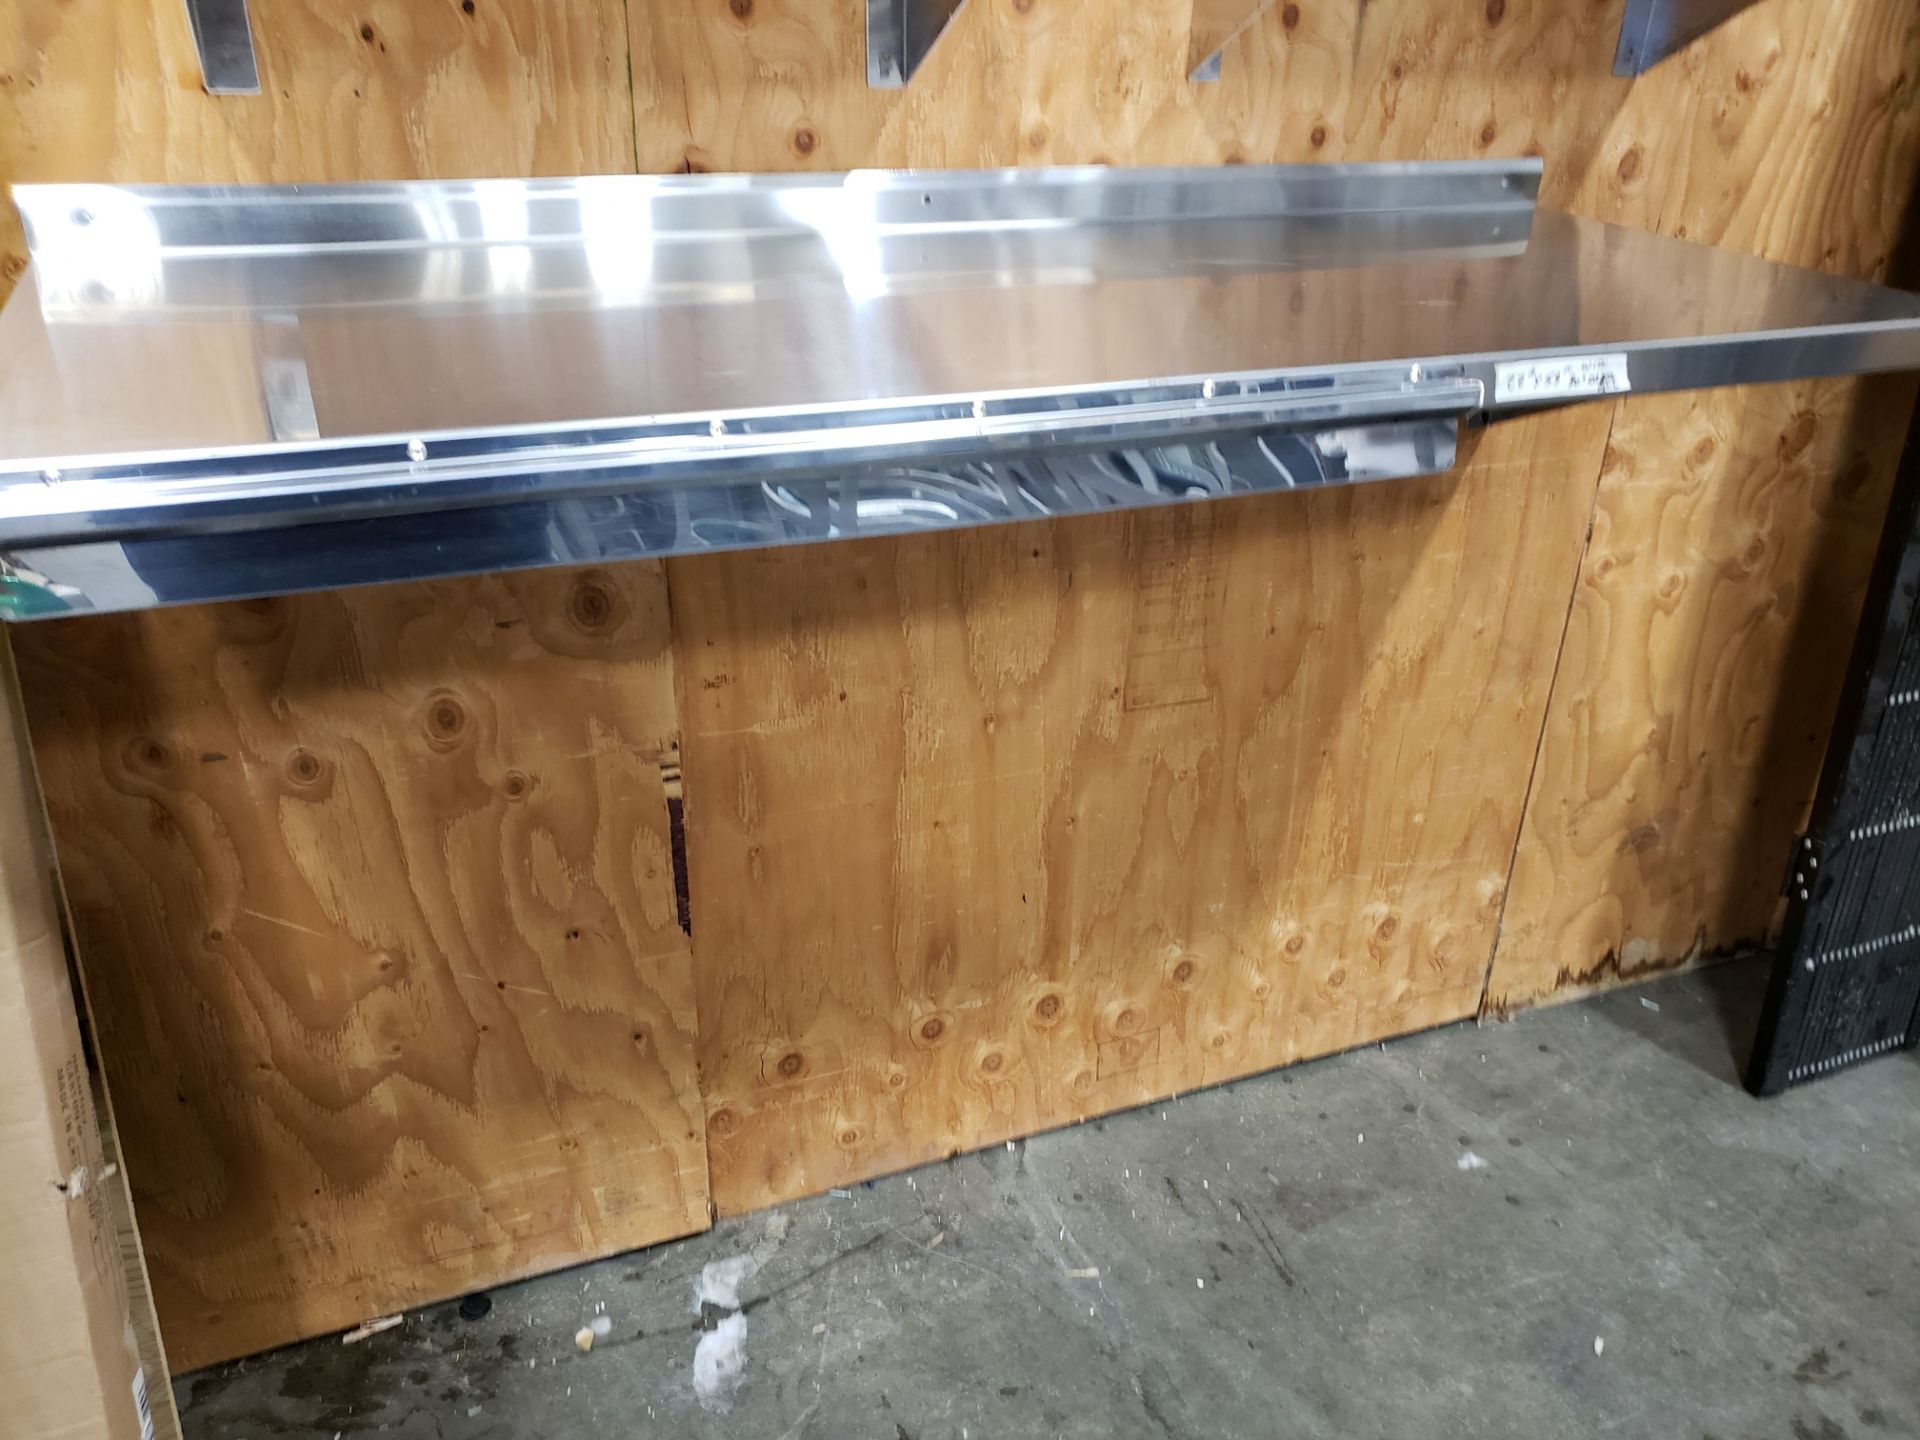 22" x 59" Stainless Steel Wall Shelf with 30" Order Rail - Image 2 of 3